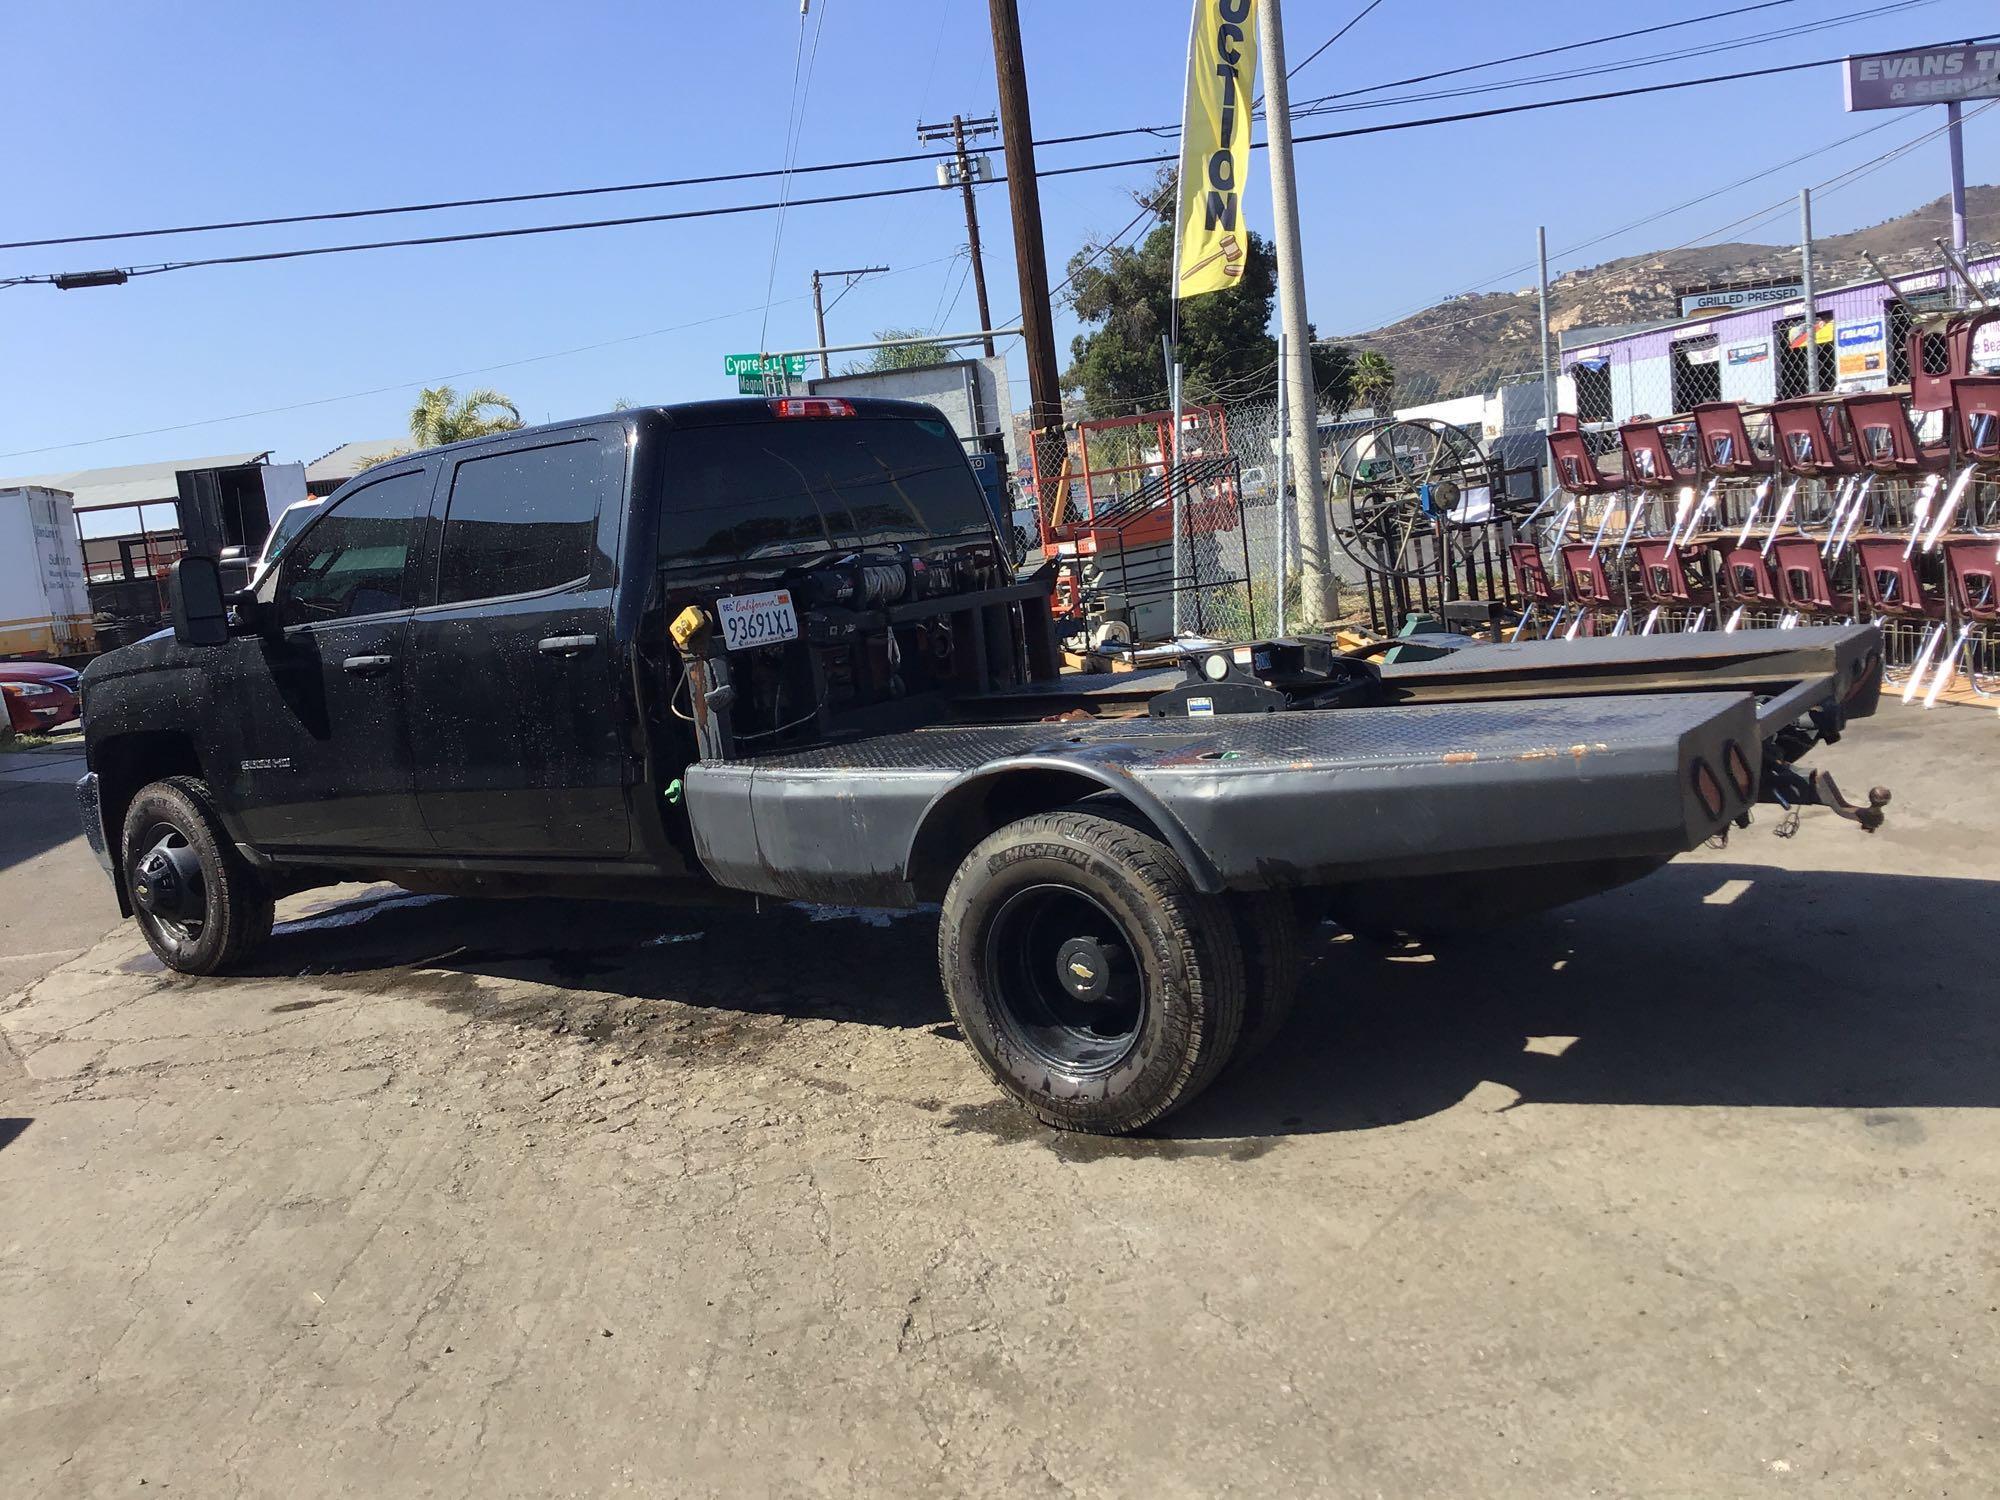 2016 Chevrolet Silverado 3500 Crew Cab w/Heritage Truck Tilt Back Bed and Integrated Winch